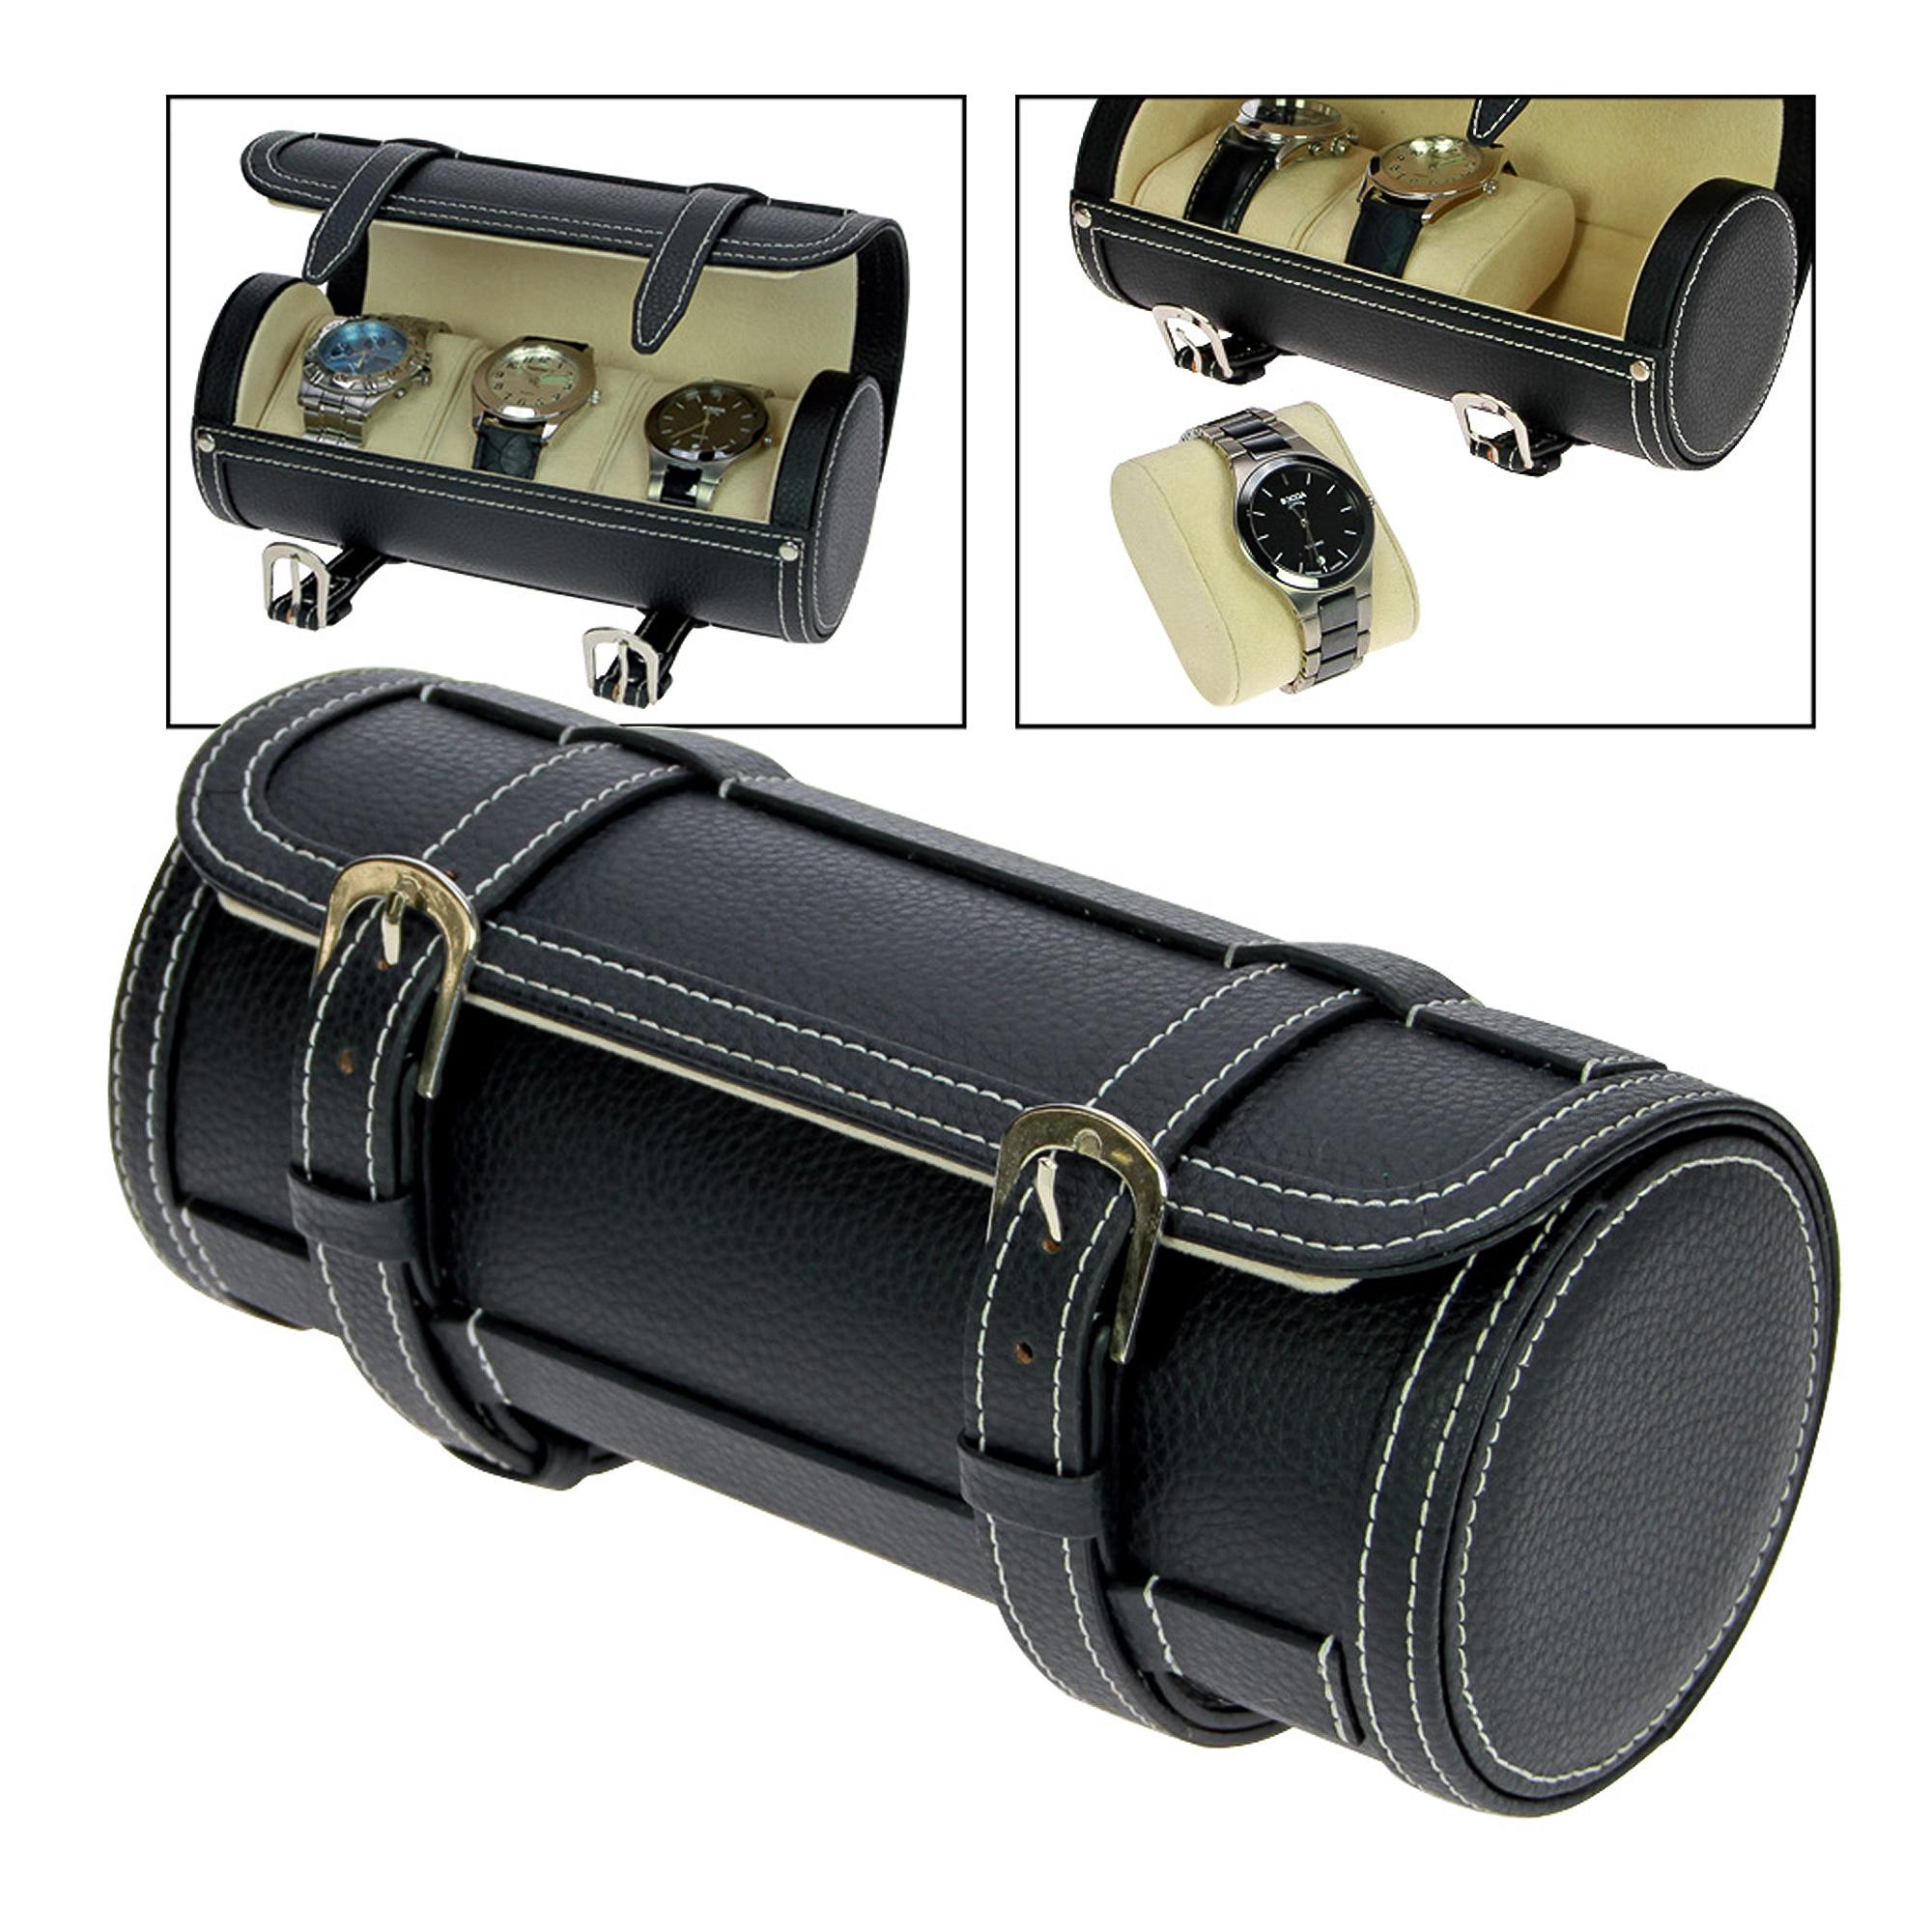 Leather look Cylindrical Travel Watch case for 3 watches